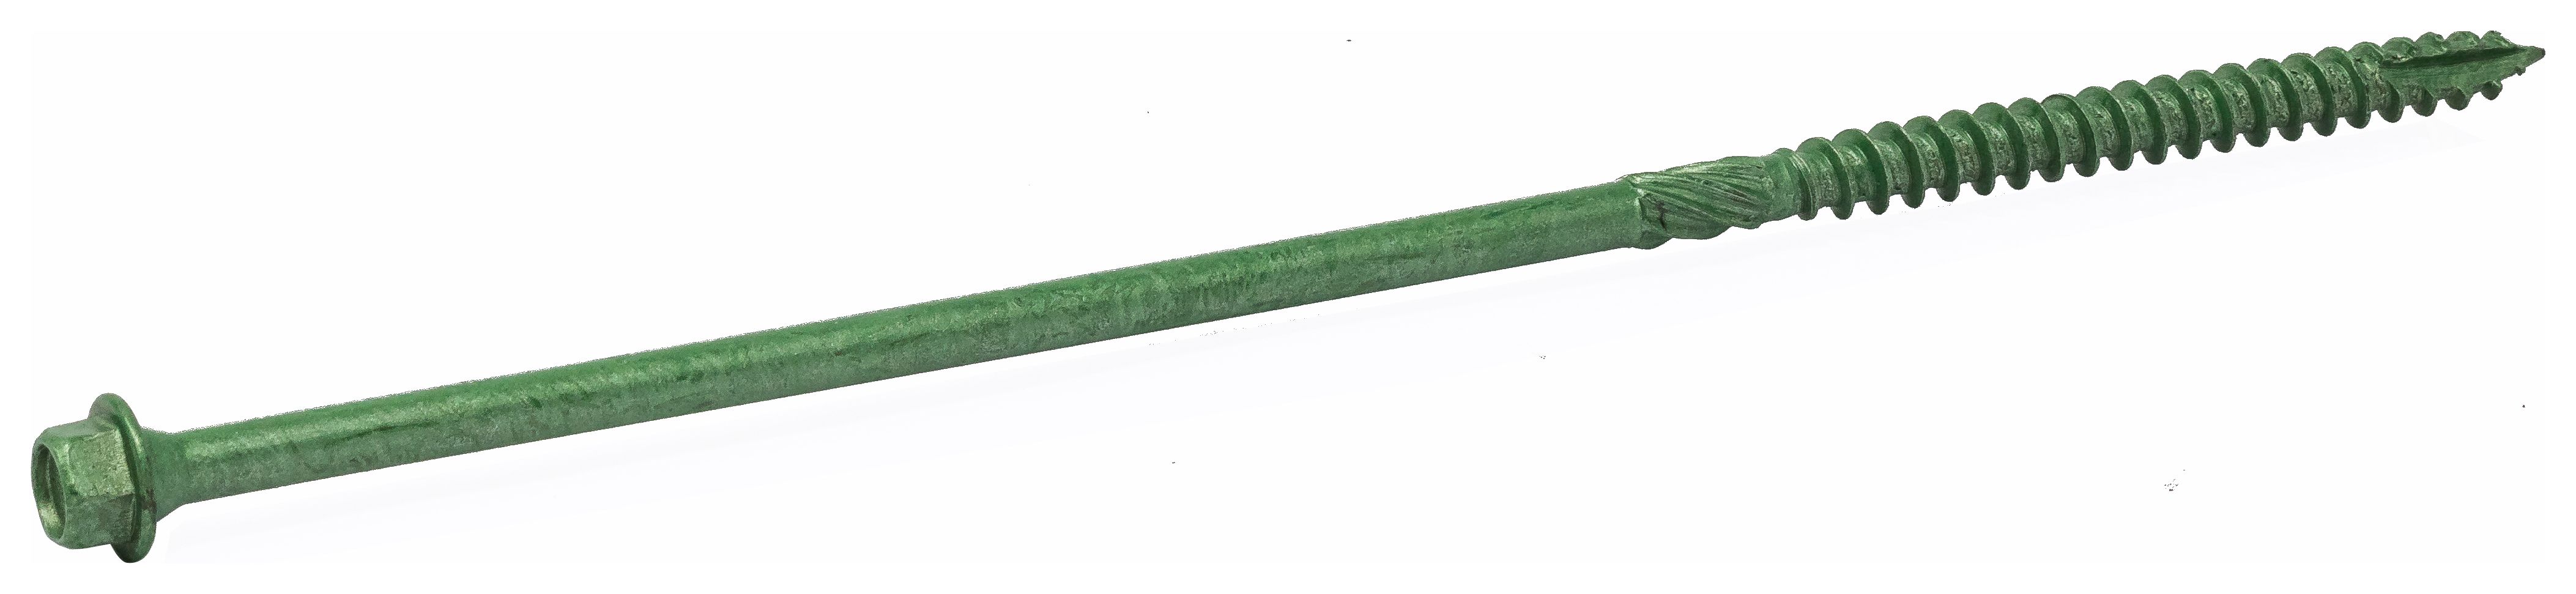 Image of Wickes Timber Drive Hex Head Green Screw - 7x200mm Pack Of 50